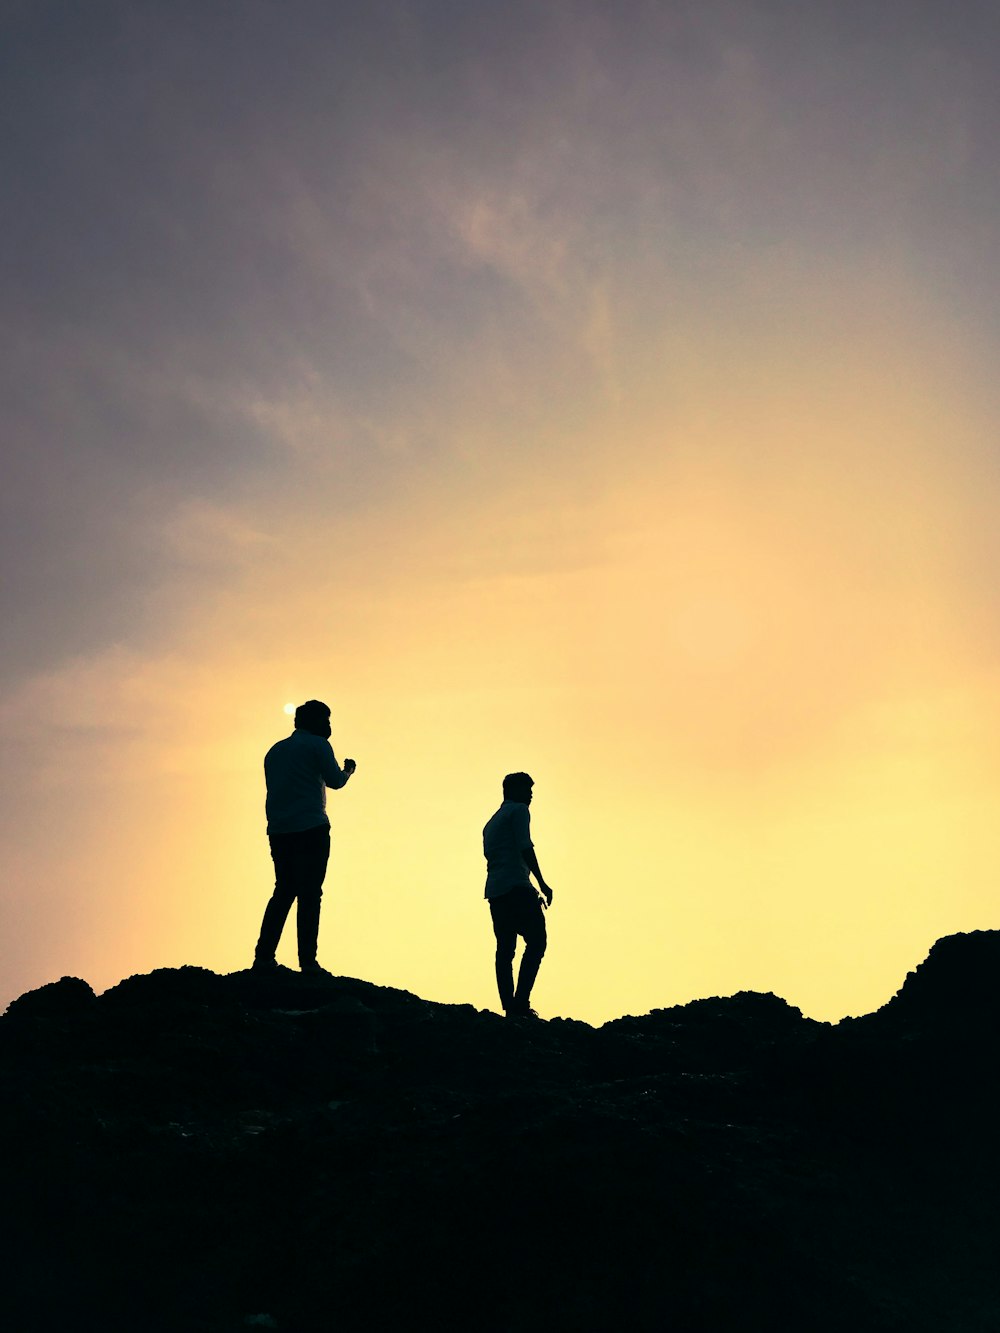 silhouette of 2 men standing on rock formation during sunset